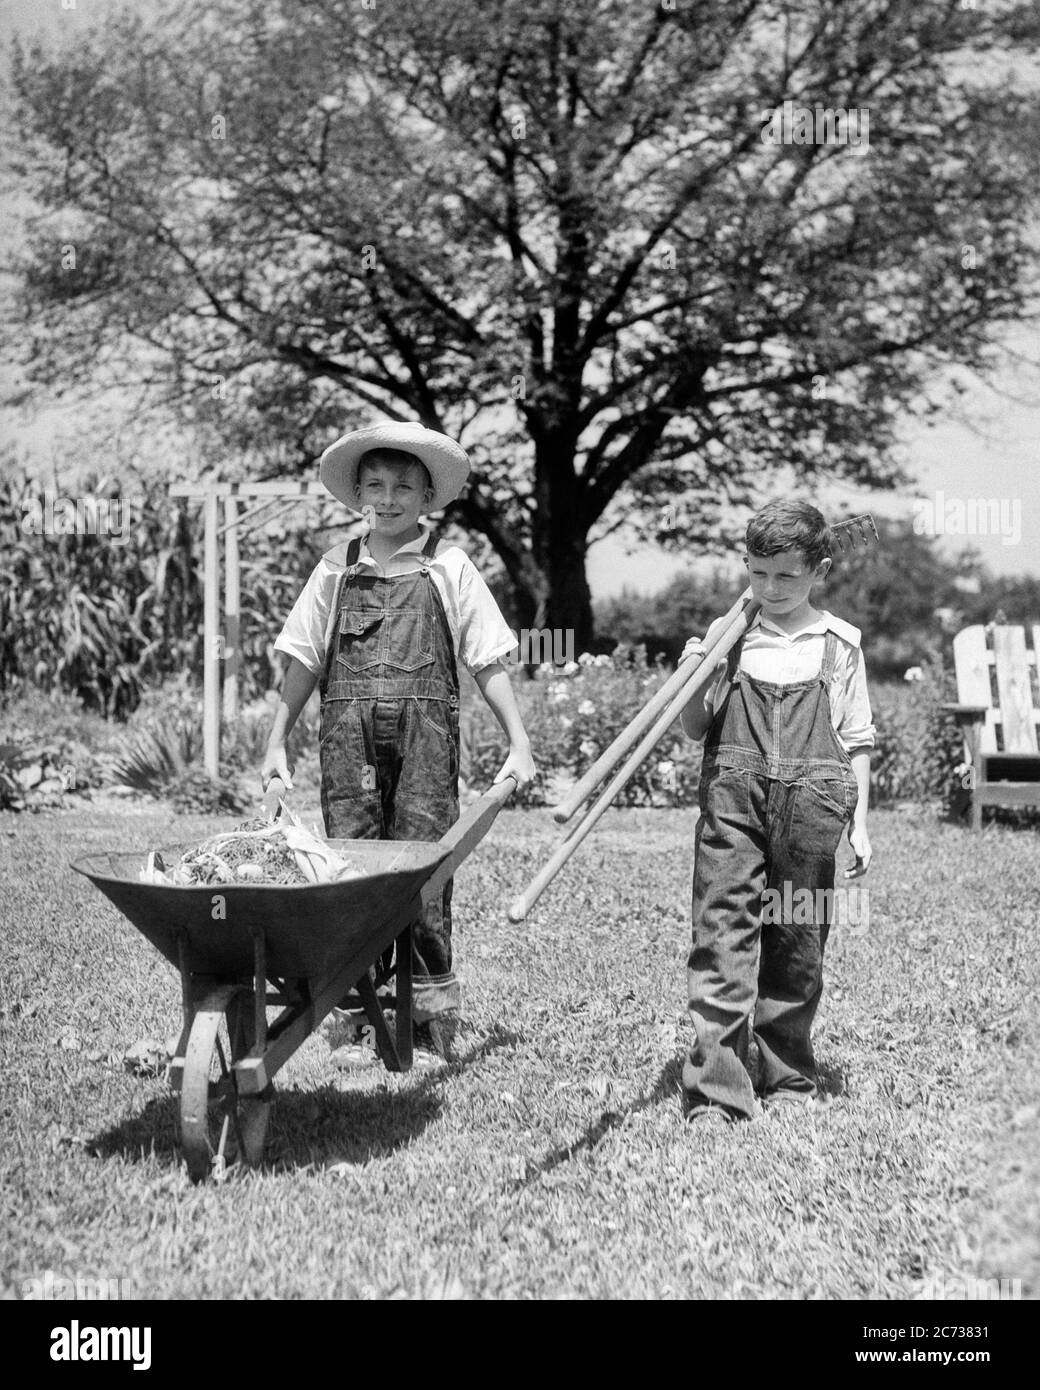 1930s TWO YOUNG SMILING FARM BOYS BROTHERS WEARING OVERALLS WALKING TOGETHER TOWARD CAMERA WITH WHEELBARROW AND GARDENING TOOLS  - f6904 HAR001 HARS PLEASED JOY LIFESTYLE BROTHERS JOBS RURAL HEALTHINESS HOME LIFE COPY SPACE FRIENDSHIP FULL-LENGTH OVERALLS CARING FARMING MALES SIBLINGS WHEELBARROW CONFIDENCE AGRICULTURE B&W GOALS HAPPINESS WELLNESS CHEERFUL STRENGTH STRATEGY AND FARMERS LEADERSHIP TOWARD PRIDE OPPORTUNITY SIBLING SMILES TASKS CONNECTION CONCEPTUAL STRAW HAT JOYFUL STYLISH VARIOUS BLUE JEANS COOPERATION GROWTH JUVENILES TOGETHERNESS BLACK AND WHITE CAUCASIAN ETHNICITY HAR001 Stock Photo